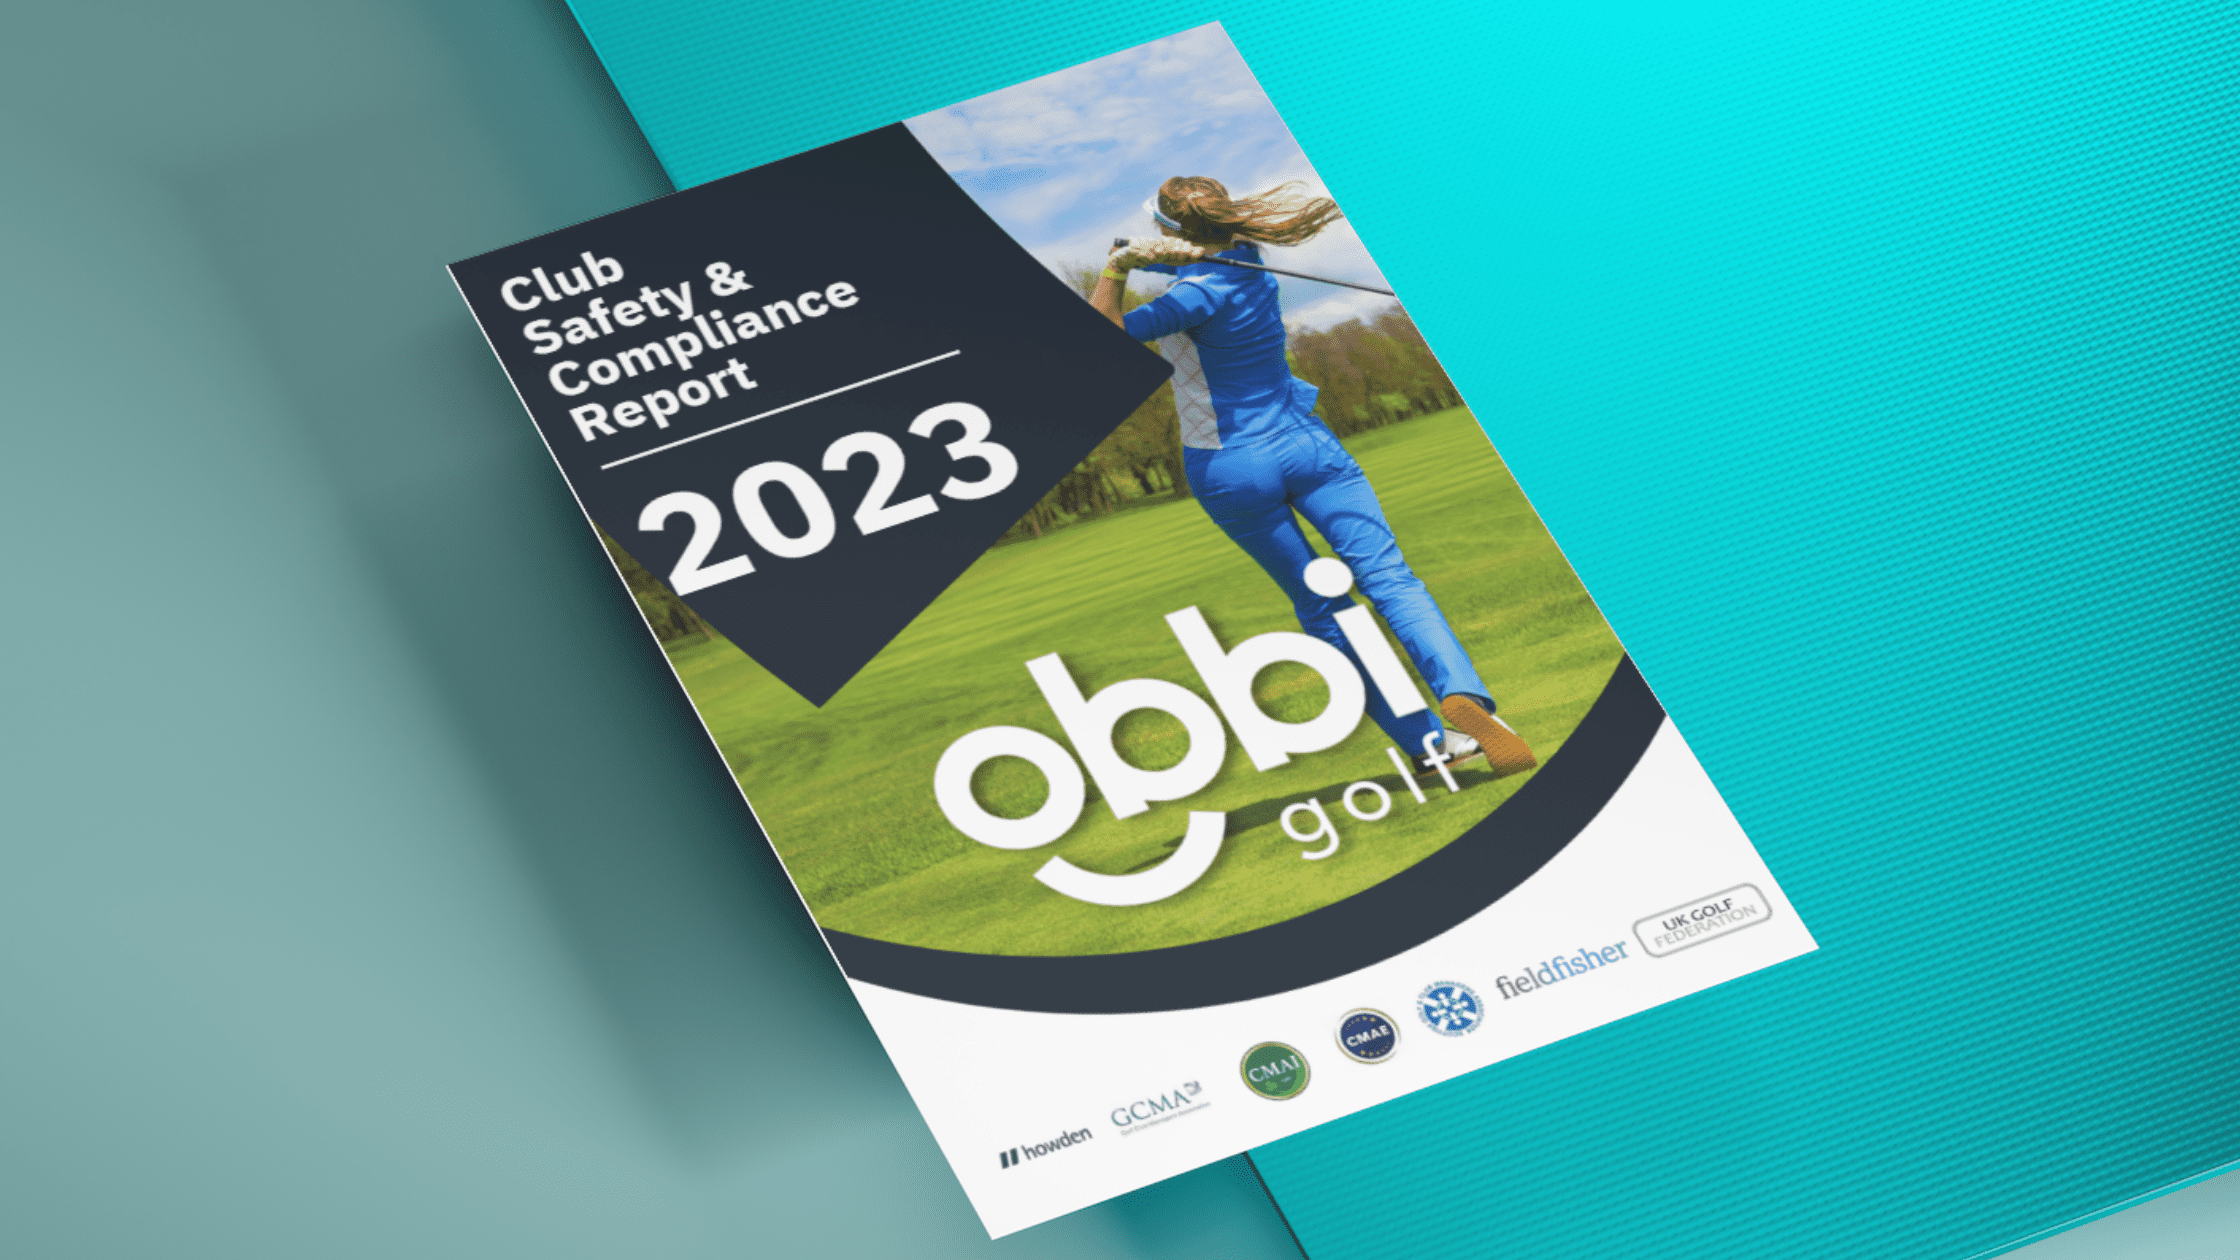 Obbi Golf Empowers Positive Change in the Golf Industry with Club Safety and Compliance Report 2023